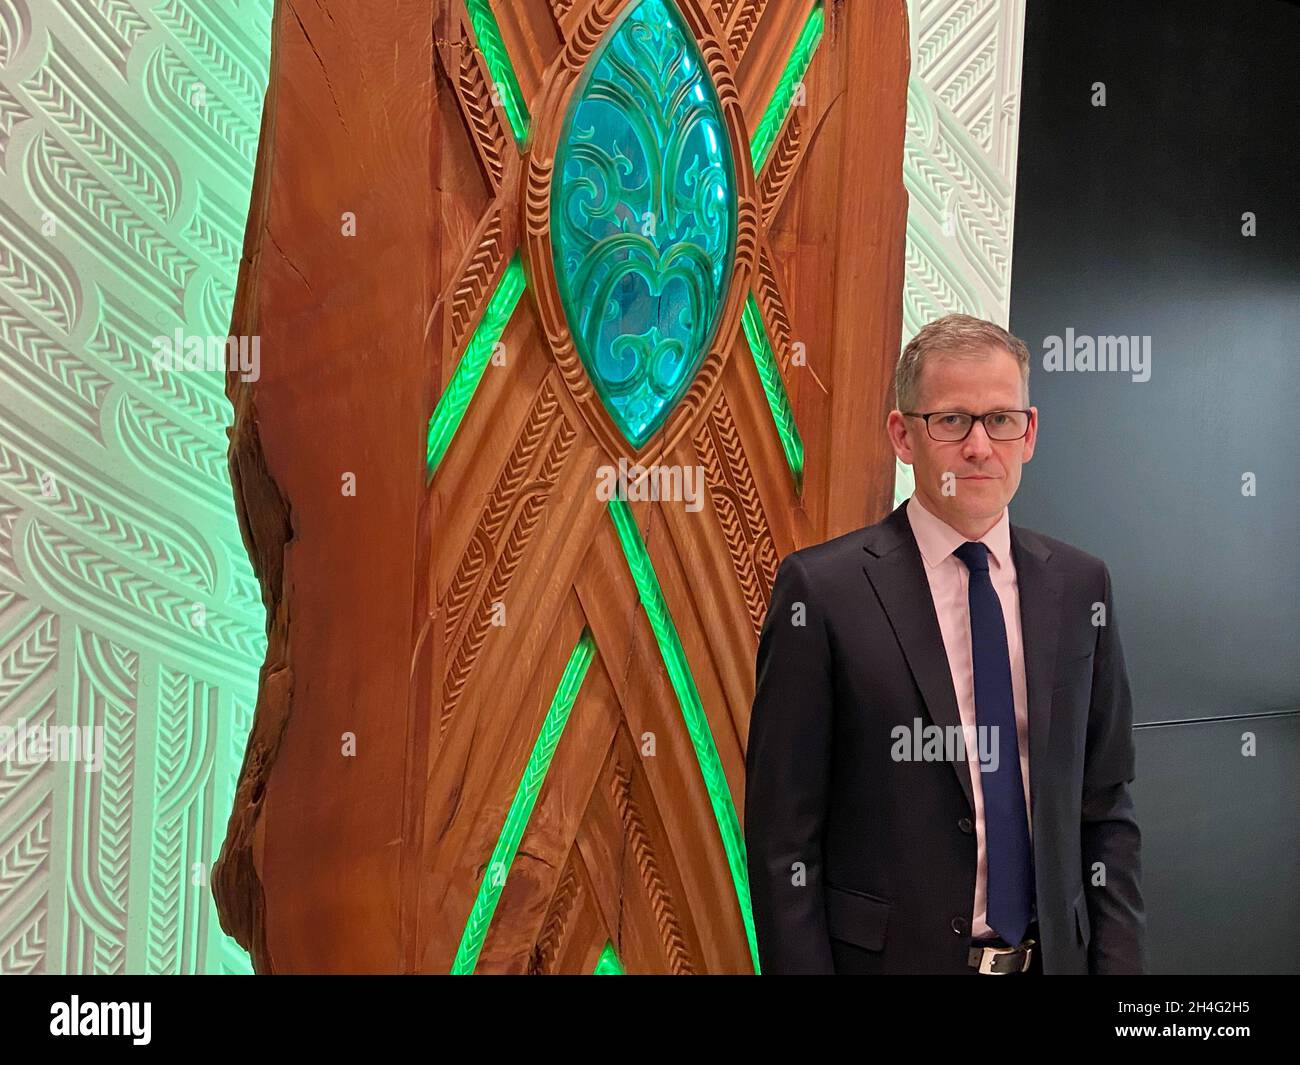 Assistant Governor Christian Hawkesby stands with an art installation of Maori forest god Tane Mahuta at the lobby of New Zealand's Central Bank building in Wellington, New Zealand September 22, 2021. Picture taken September 22, 2021. REUTERS/Praveen Menon Stock Photo